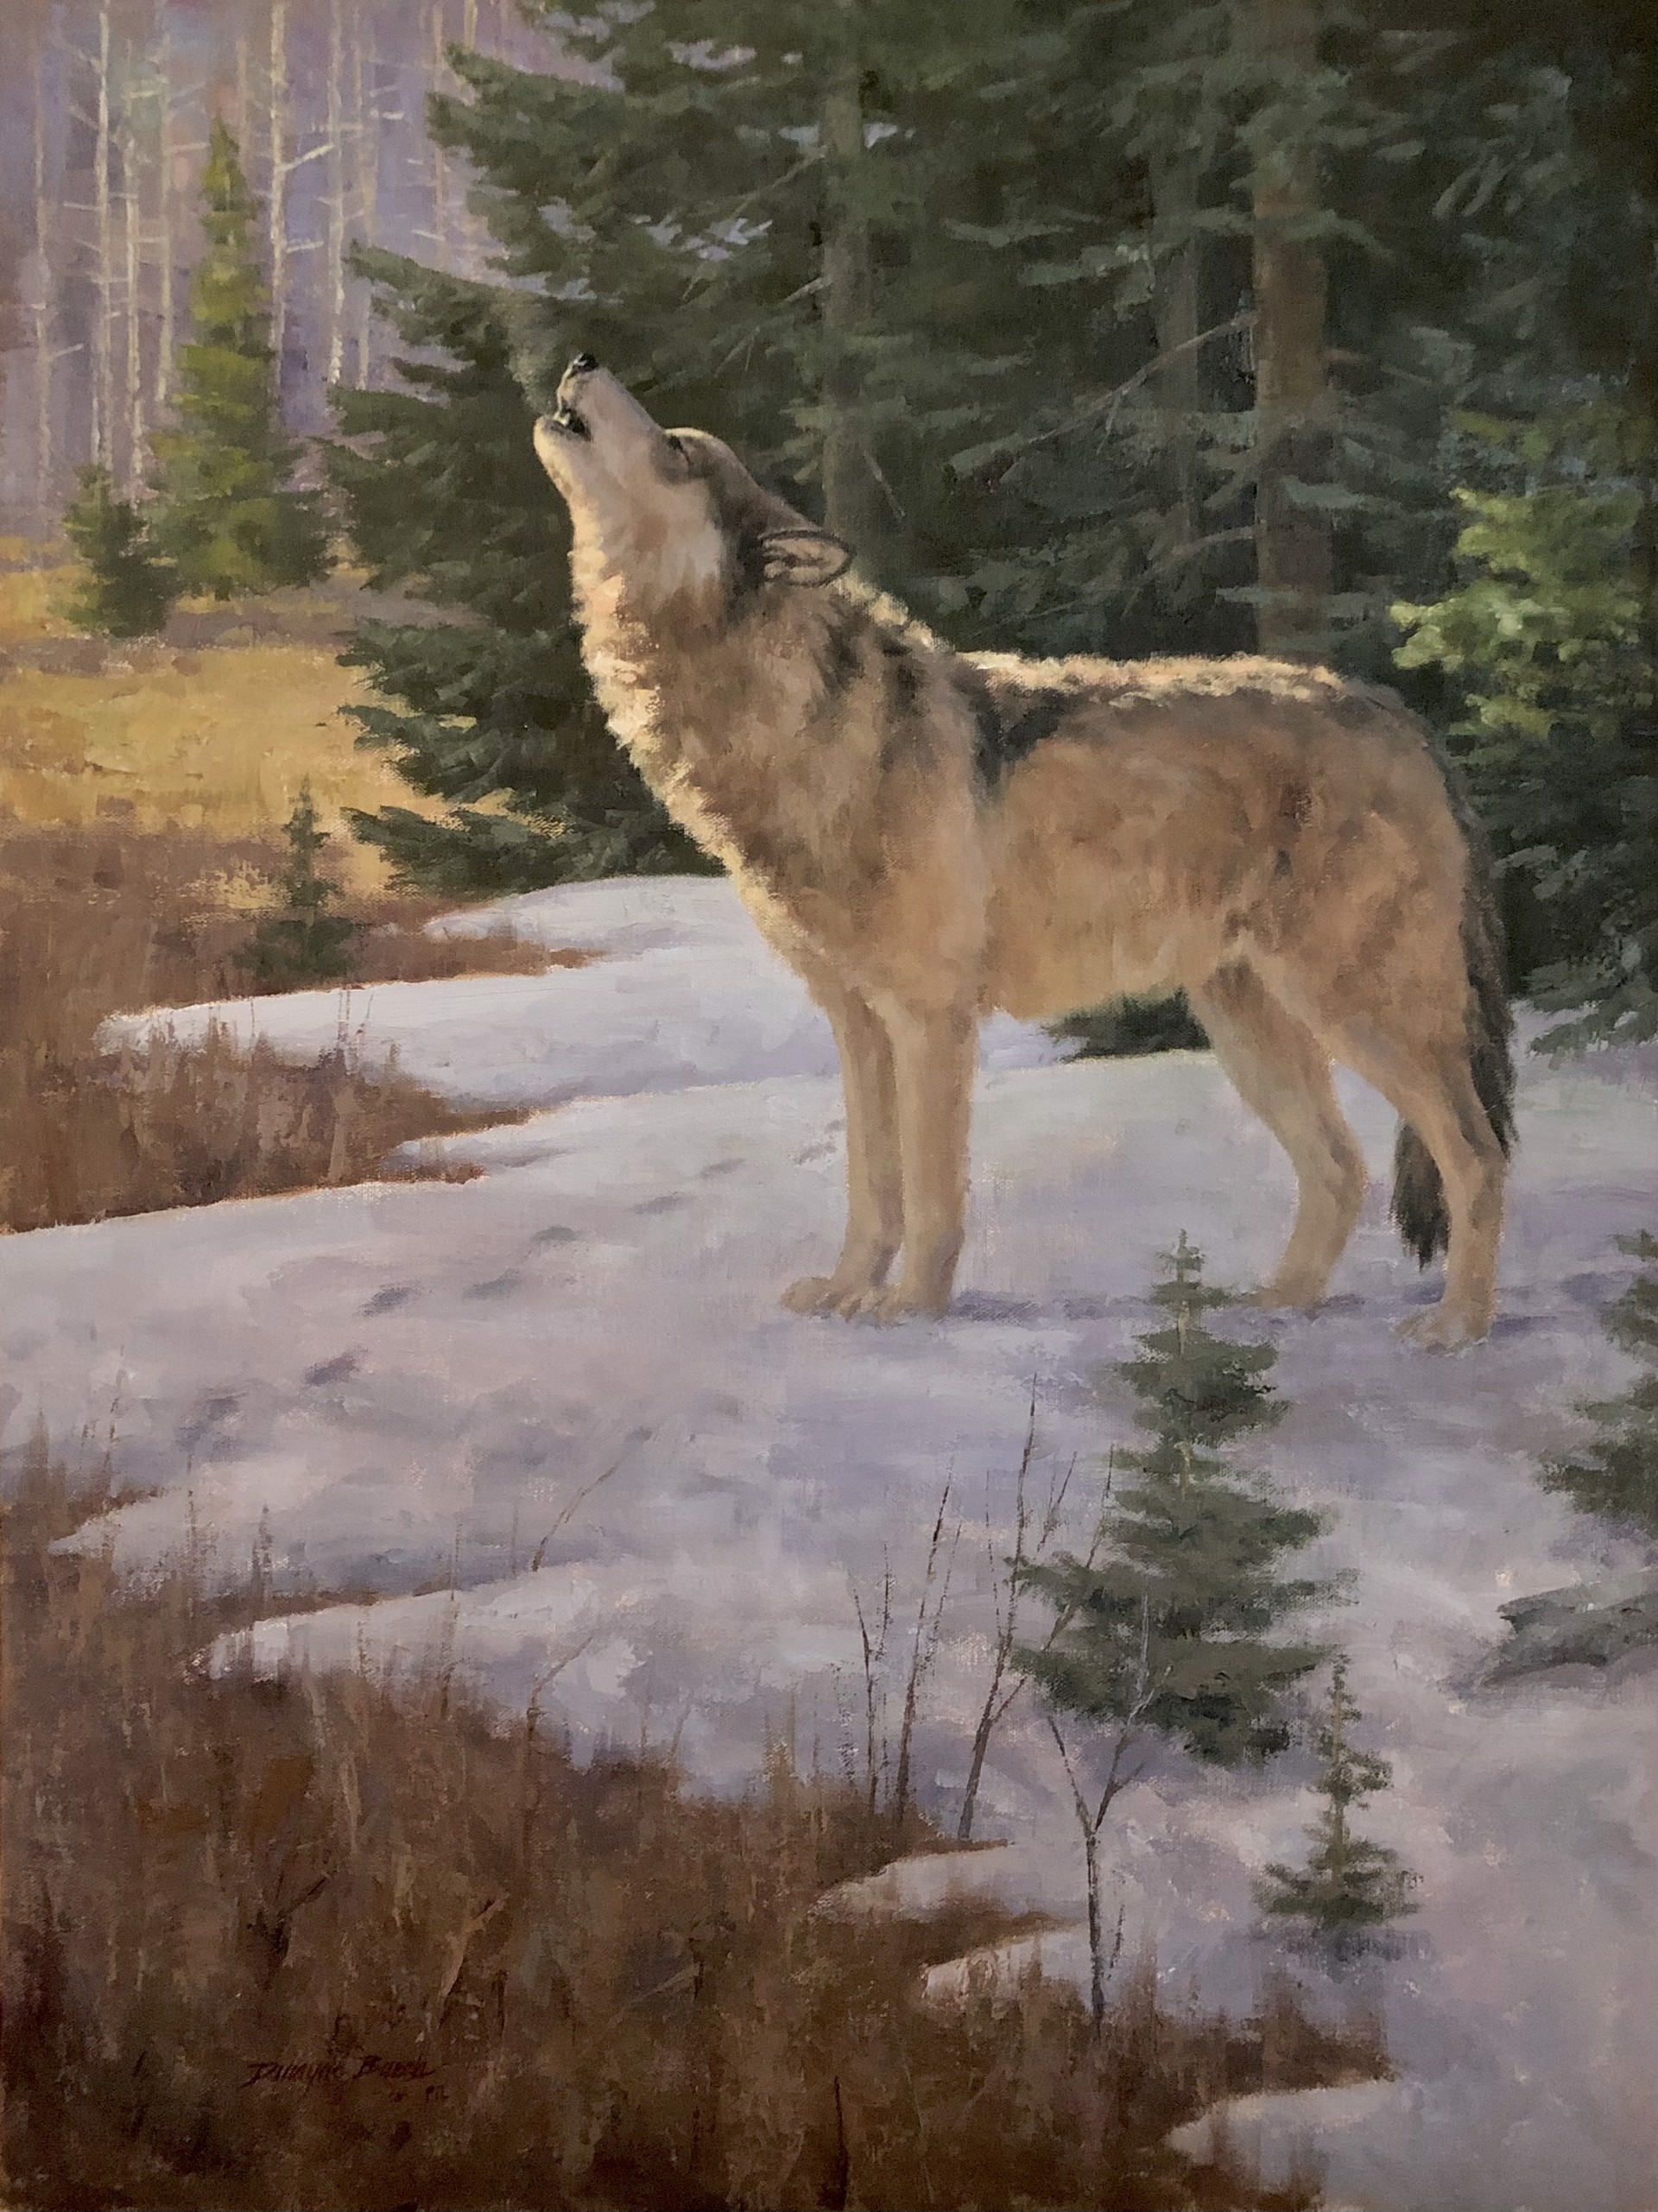 A Voice in the Wilderness by Dwayne Brech